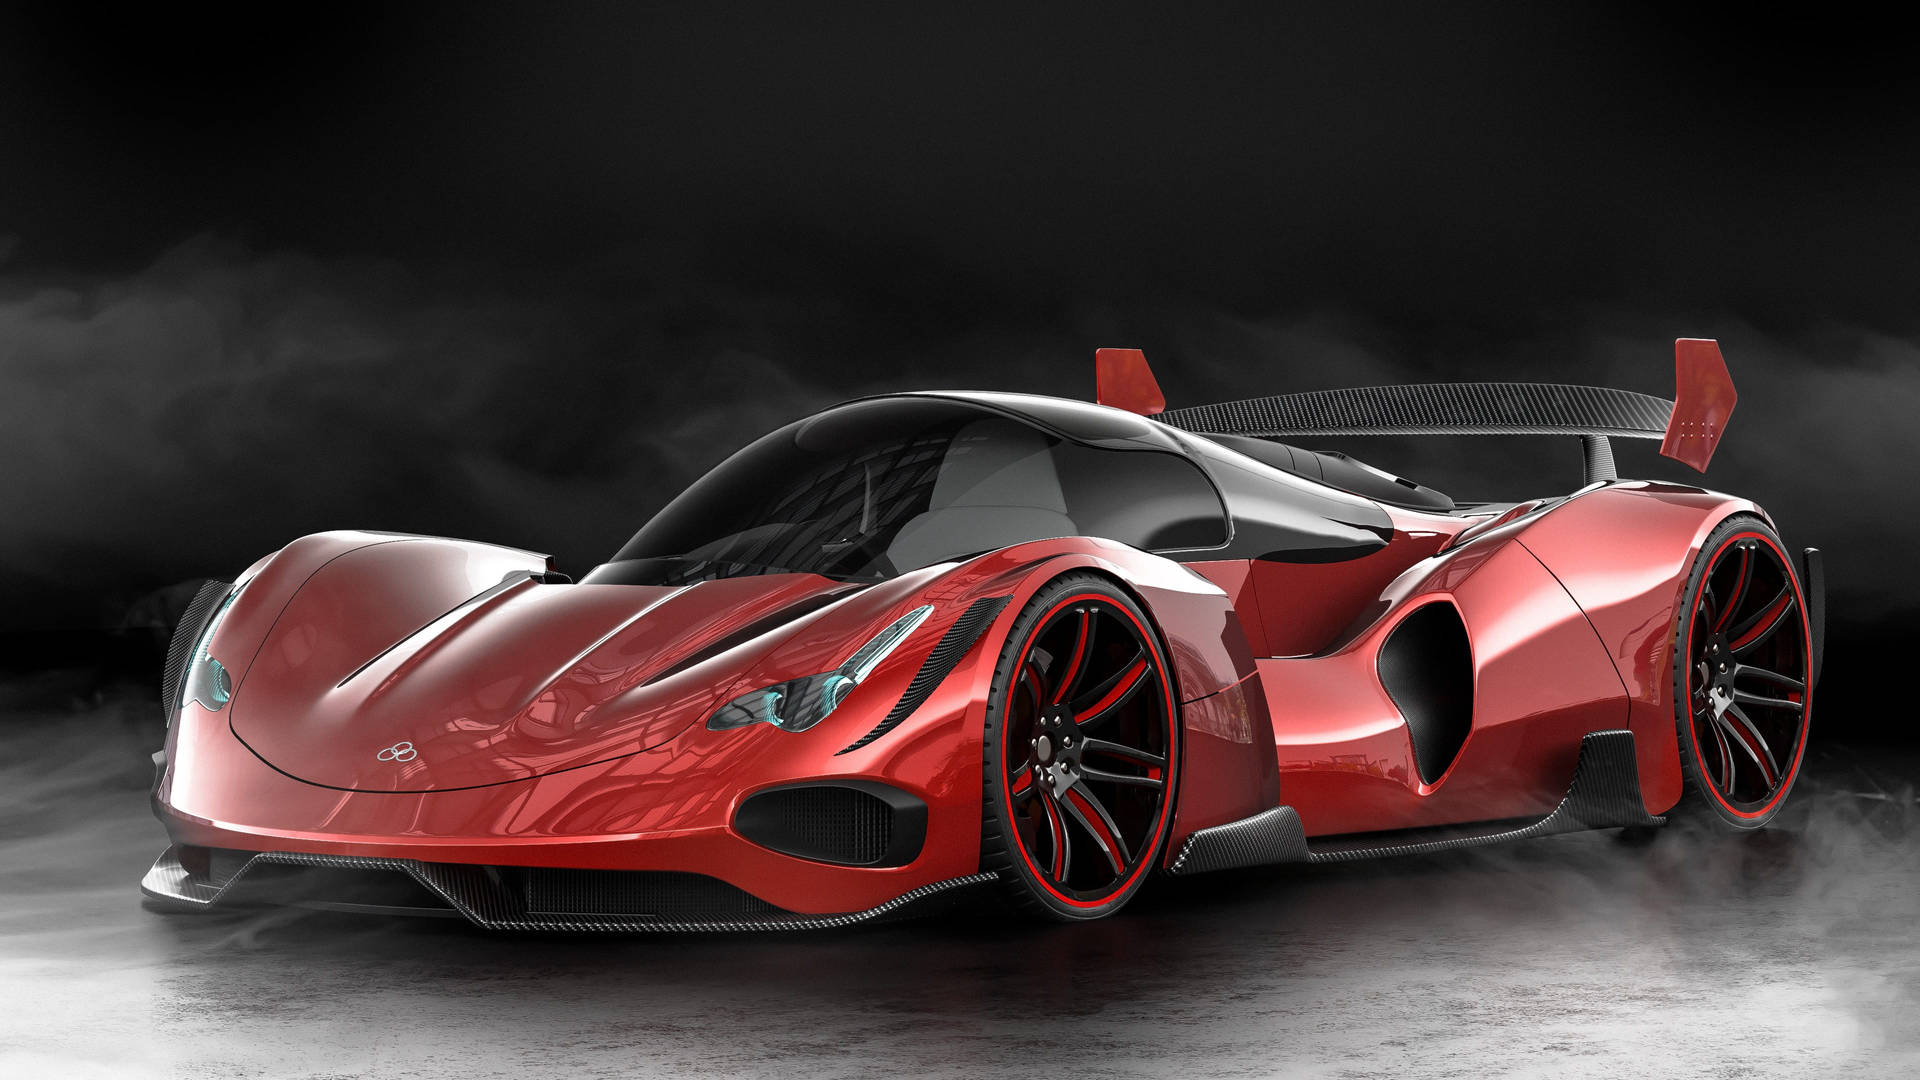 Cool Red Concept 3d Car